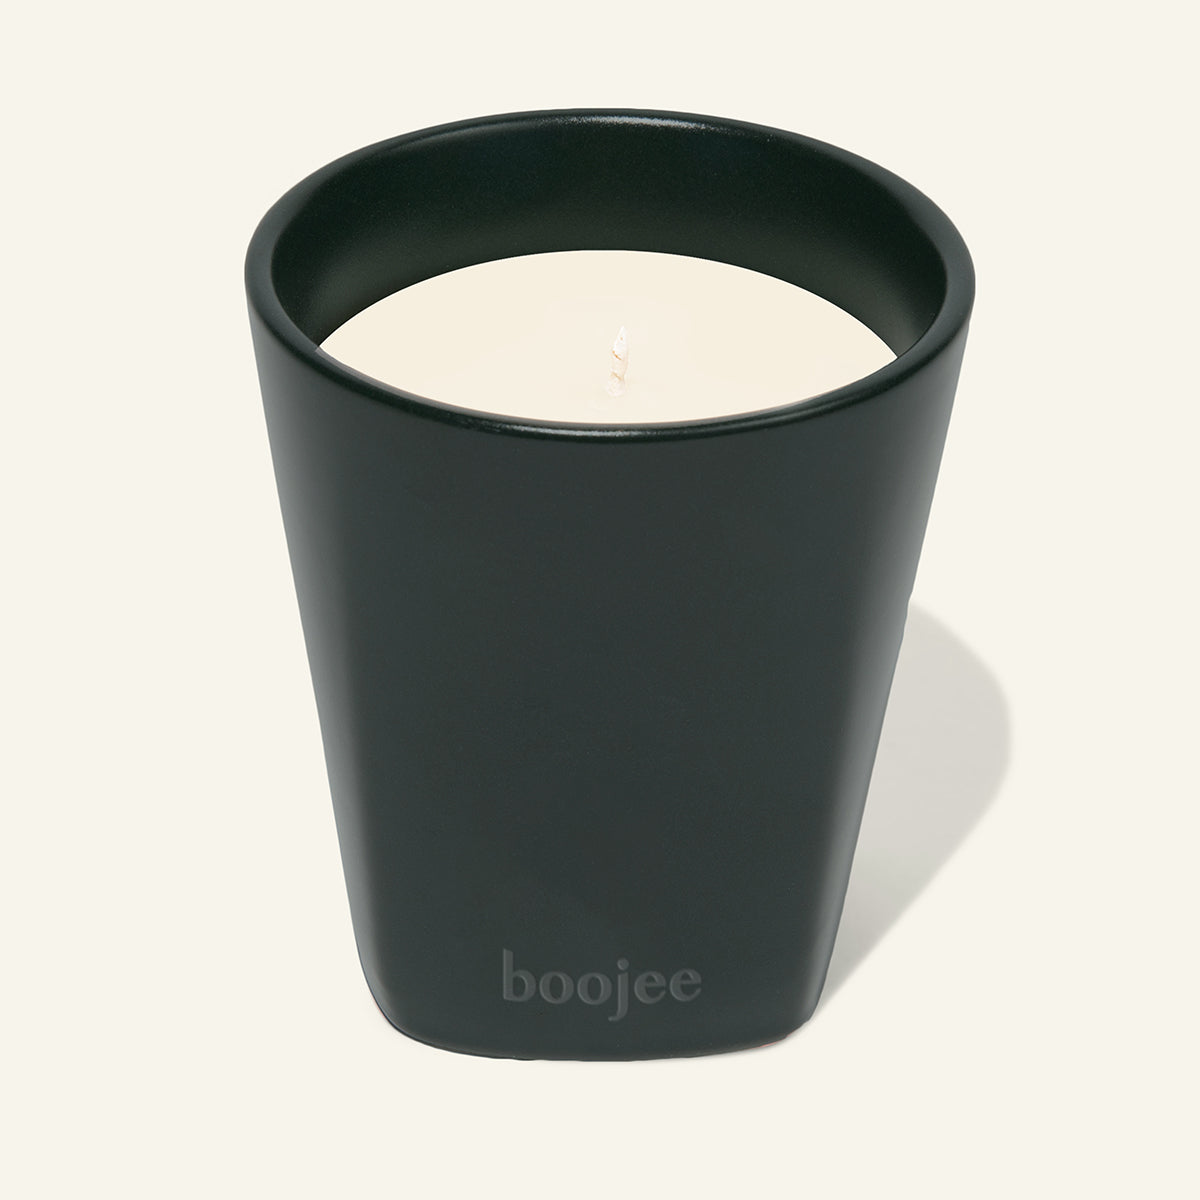 Boojee - Iconic Scented Candle Refills & Reusable Ceramic Vessels